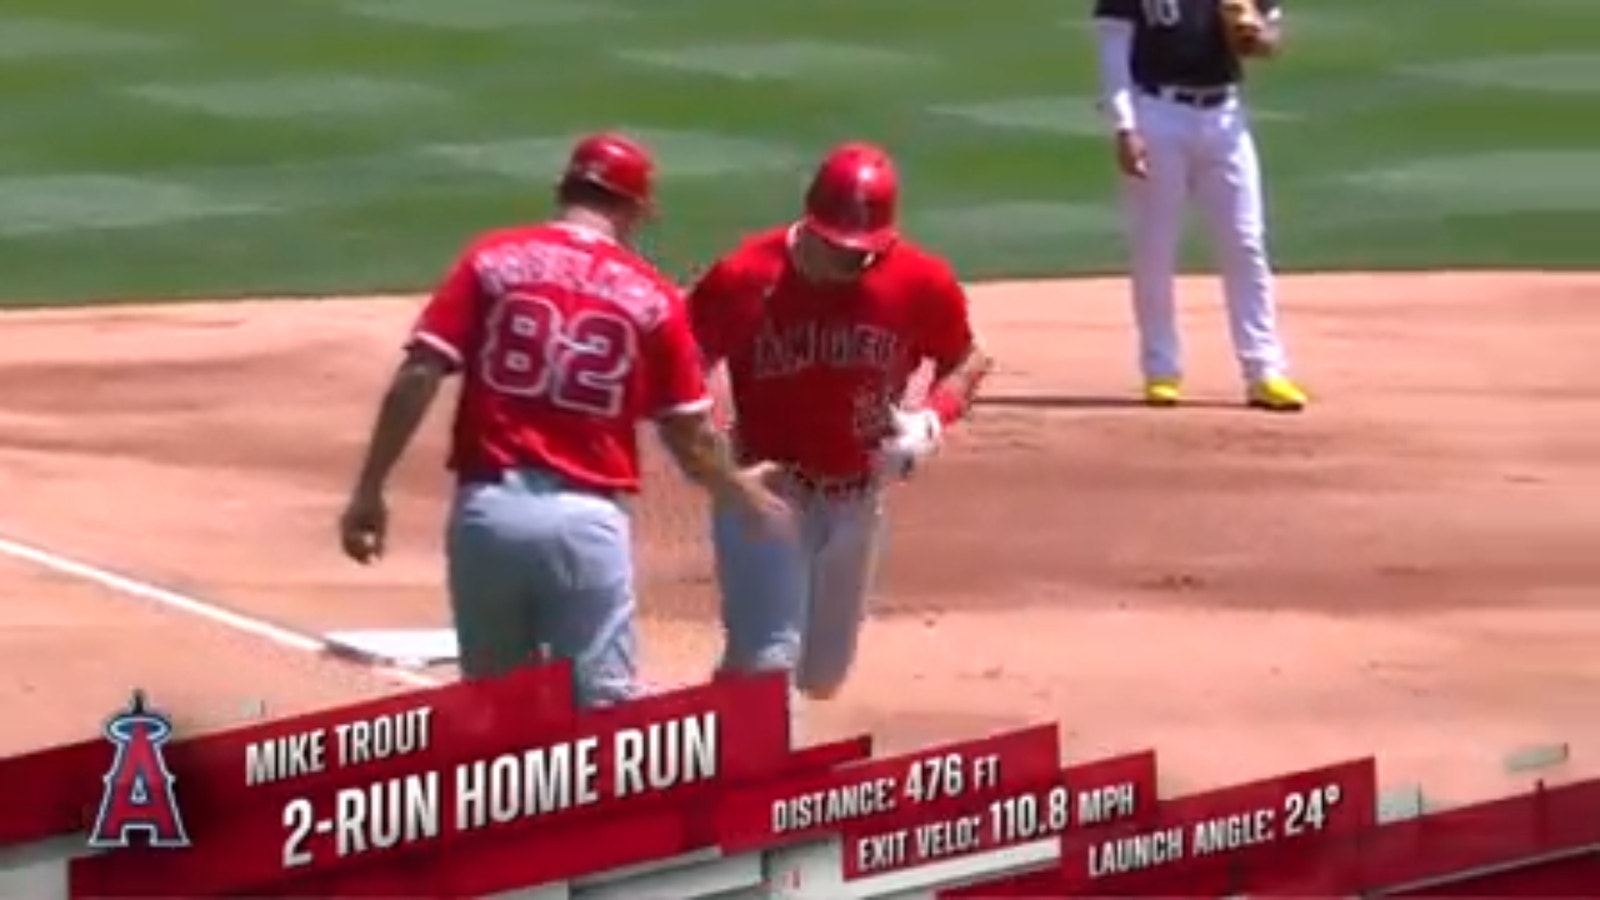 Mike Trout smashes a 461-foot home run